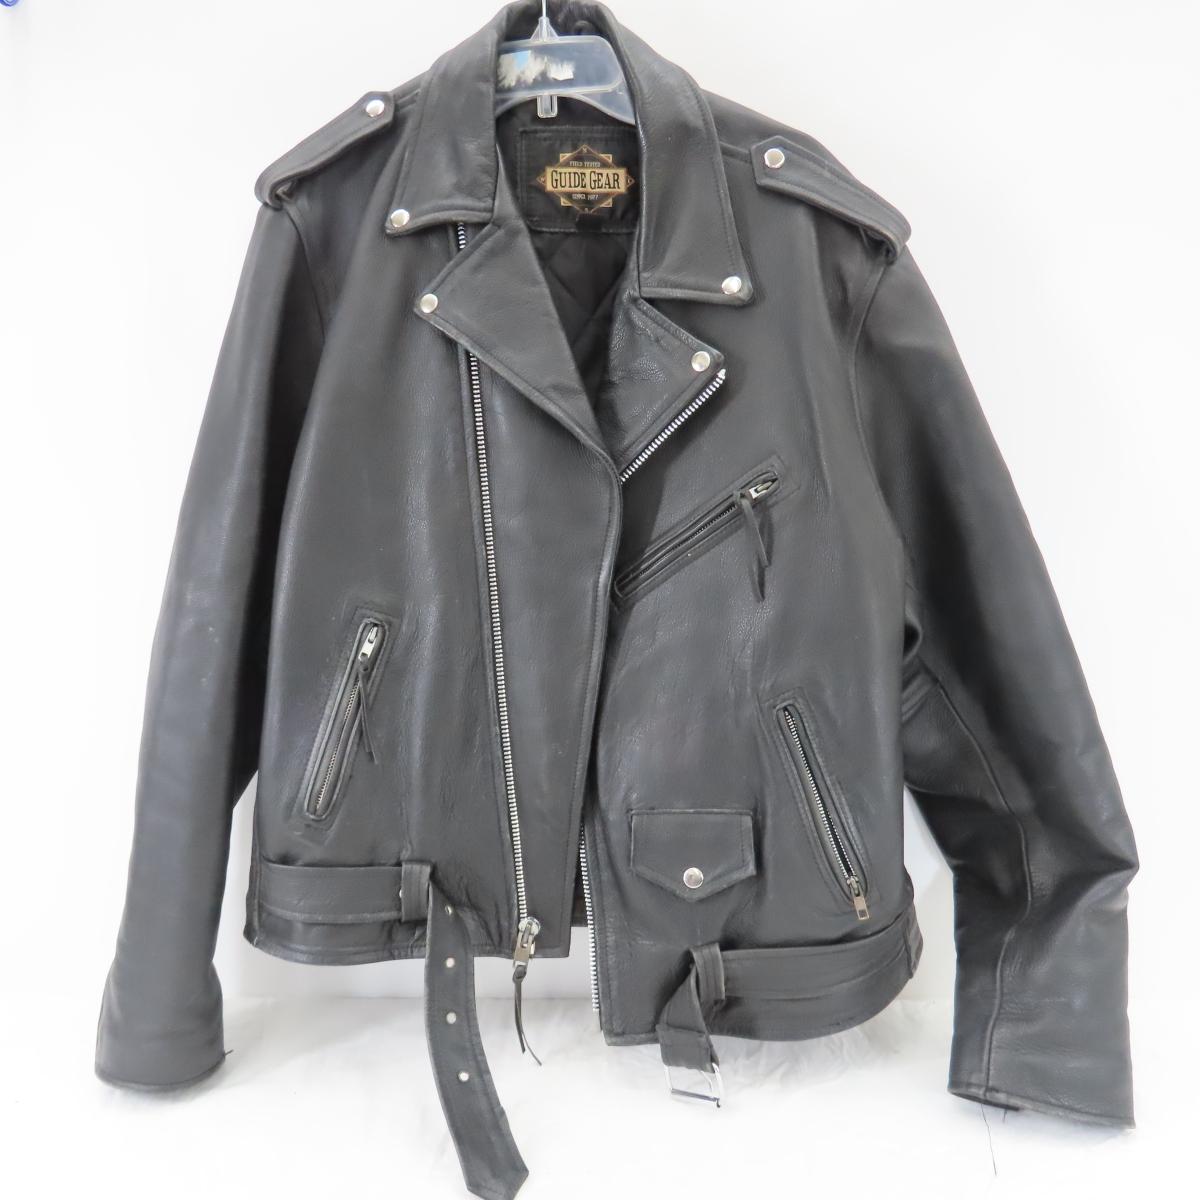 Kickstand plate, Leather Coat & Riding Gear